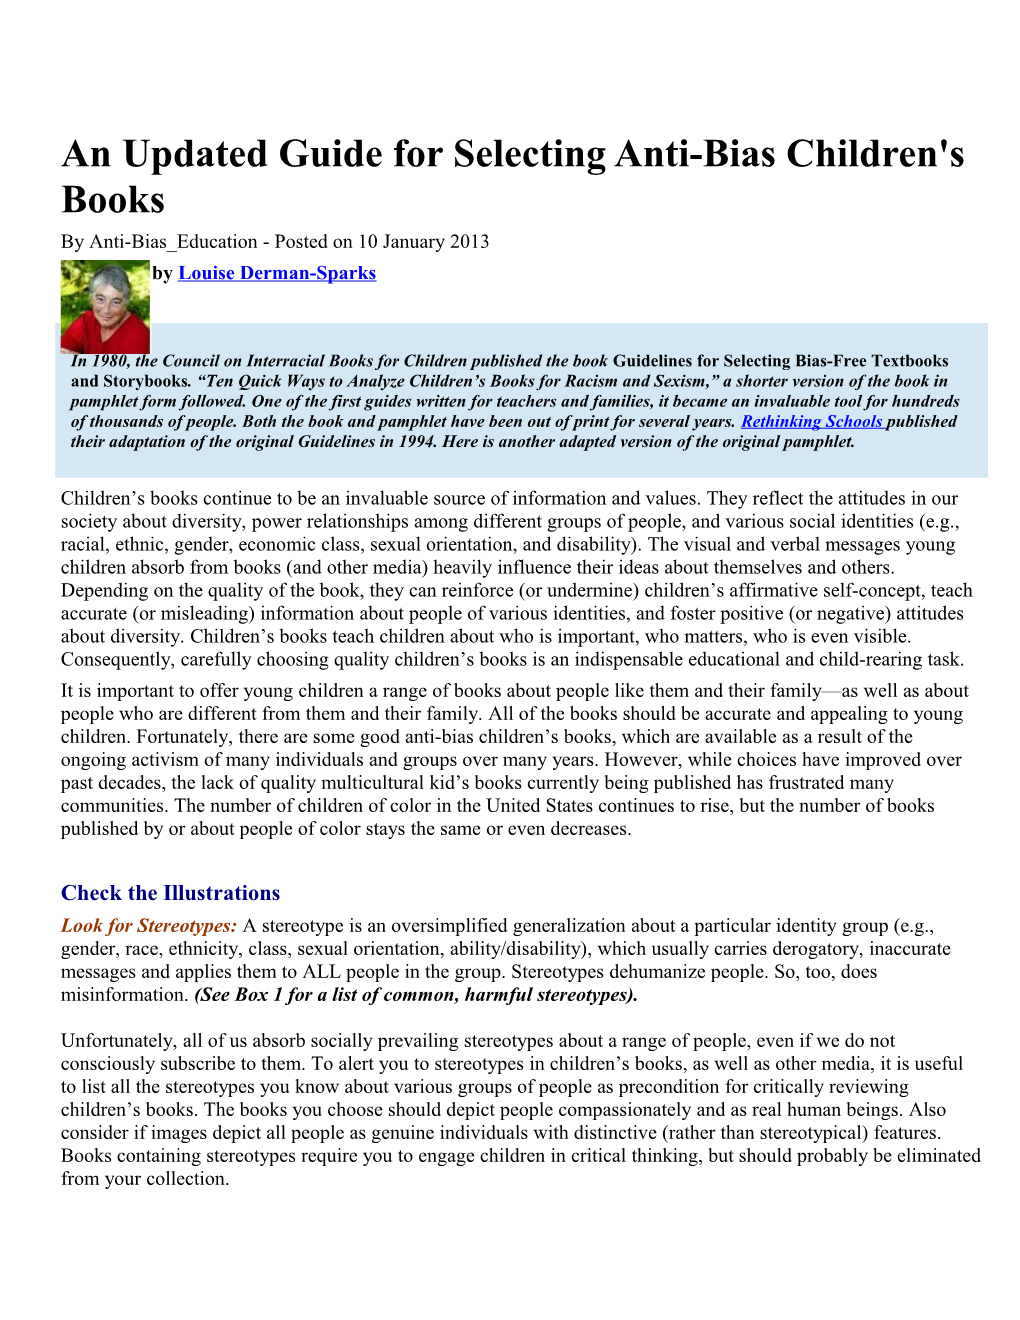 An Updated Guide for Selecting Anti-Bias Children's Books